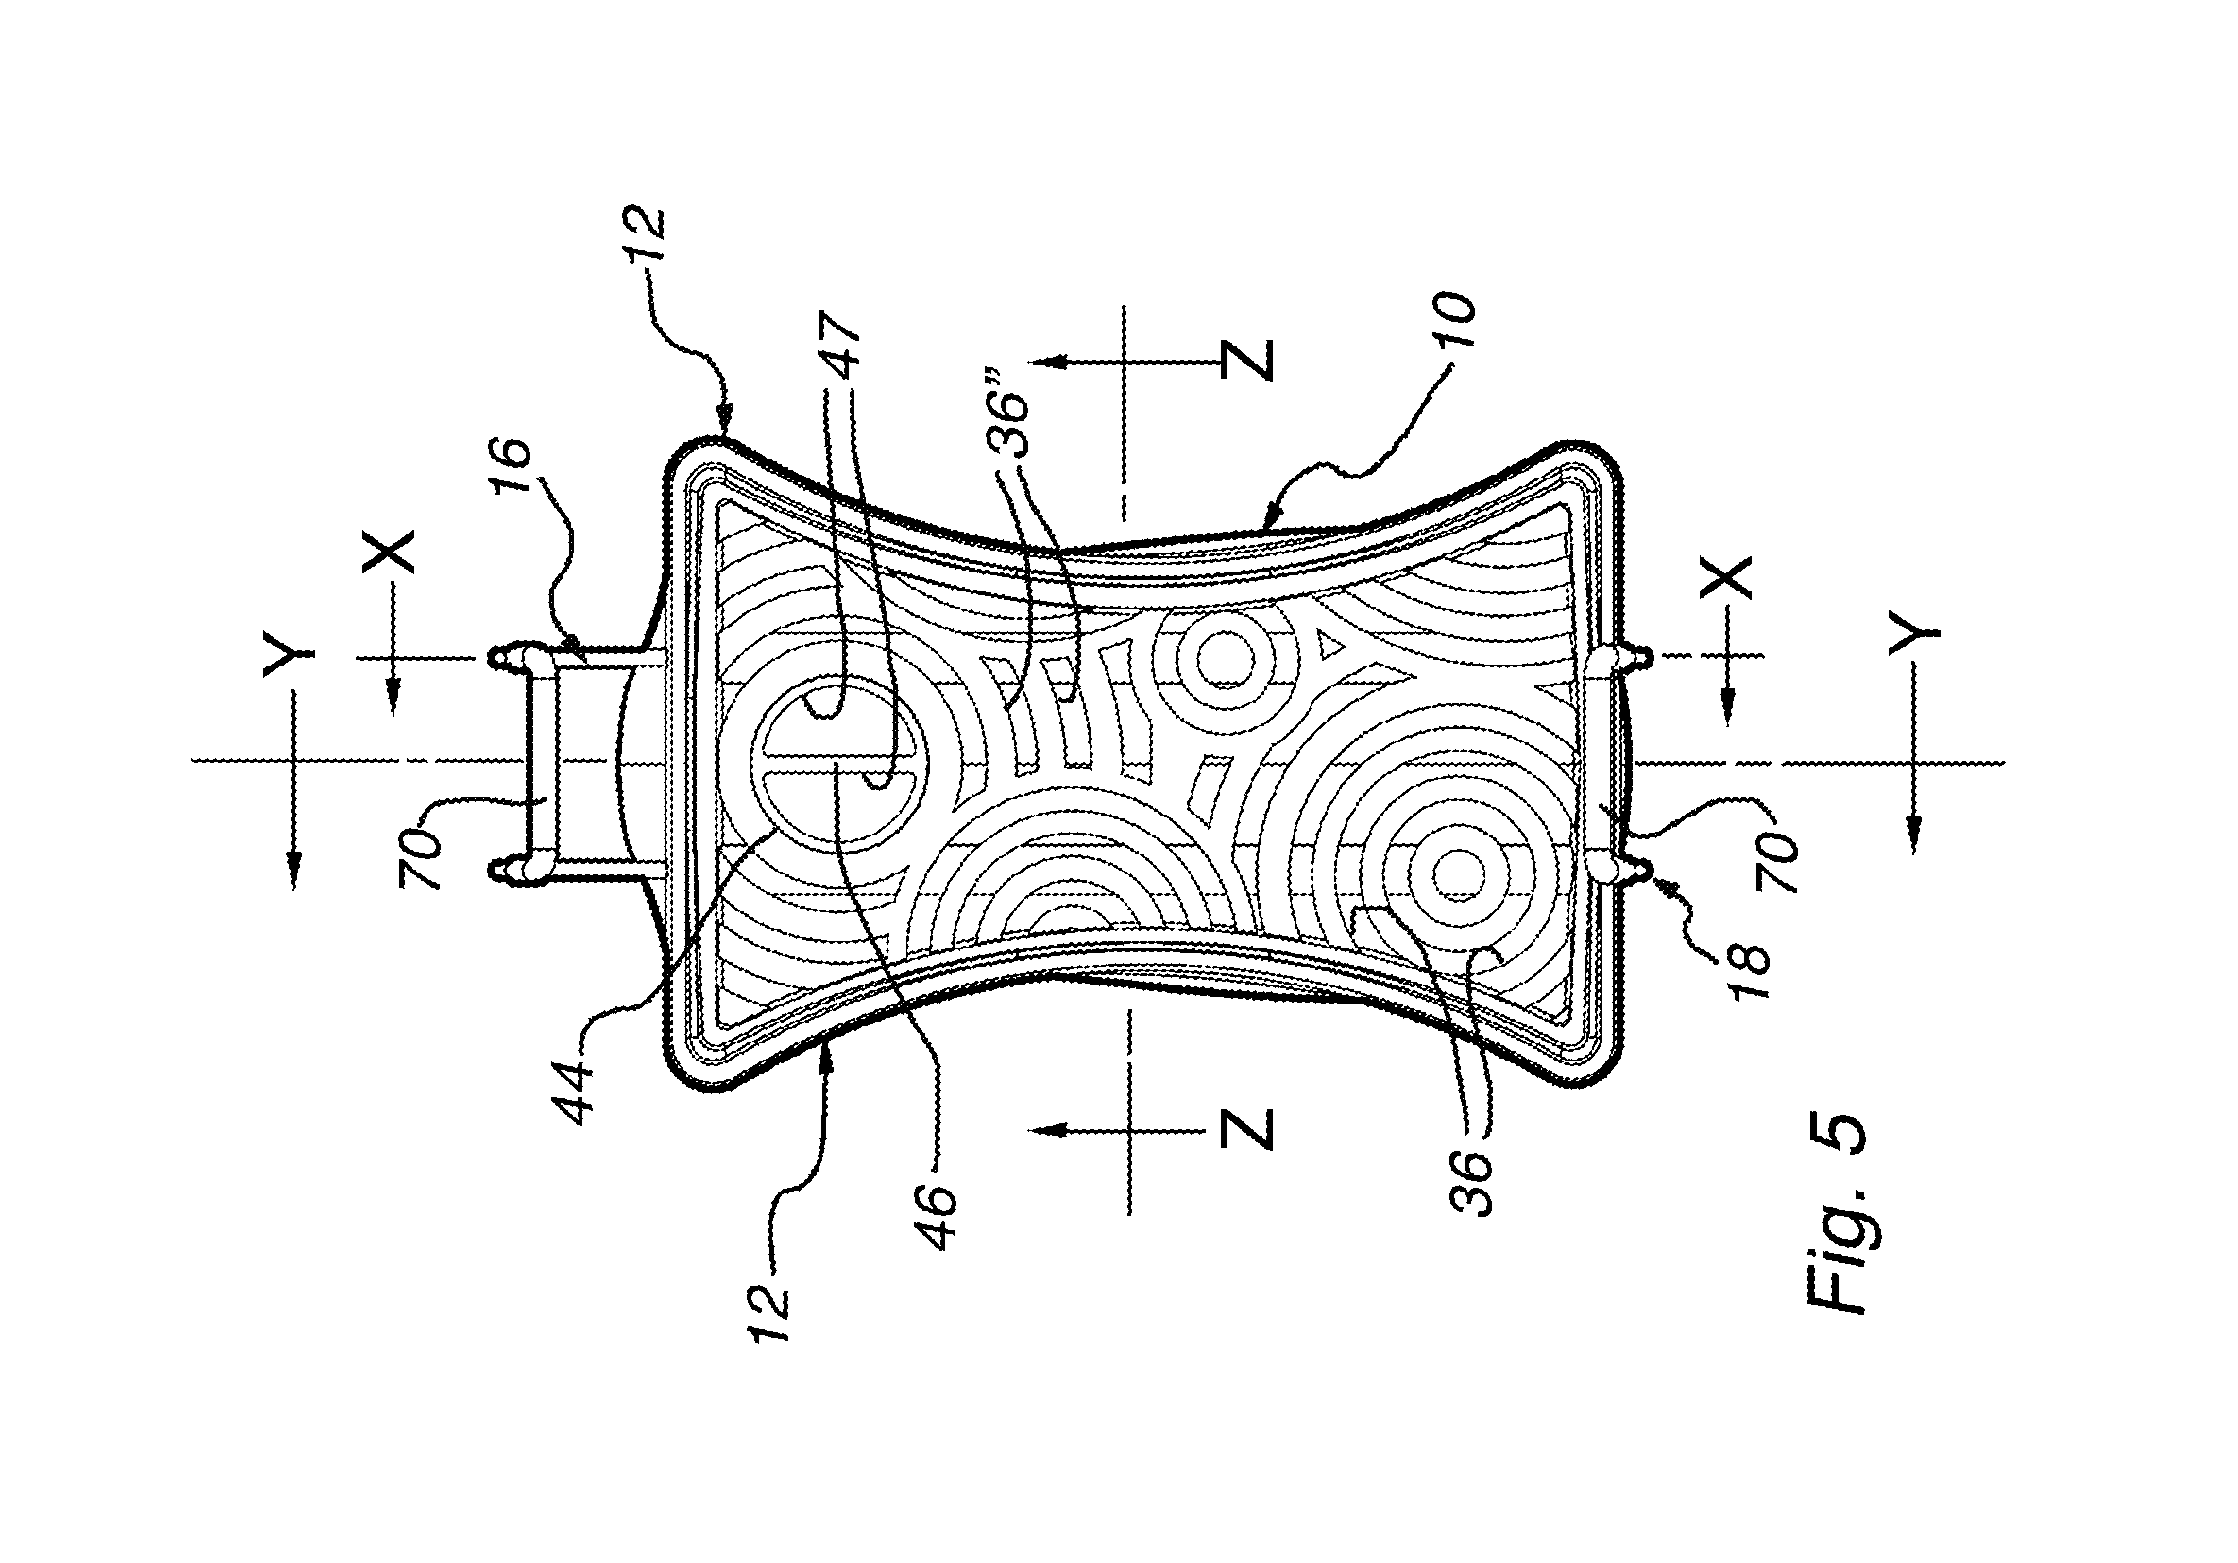 Holder for hand-held electronic communication device